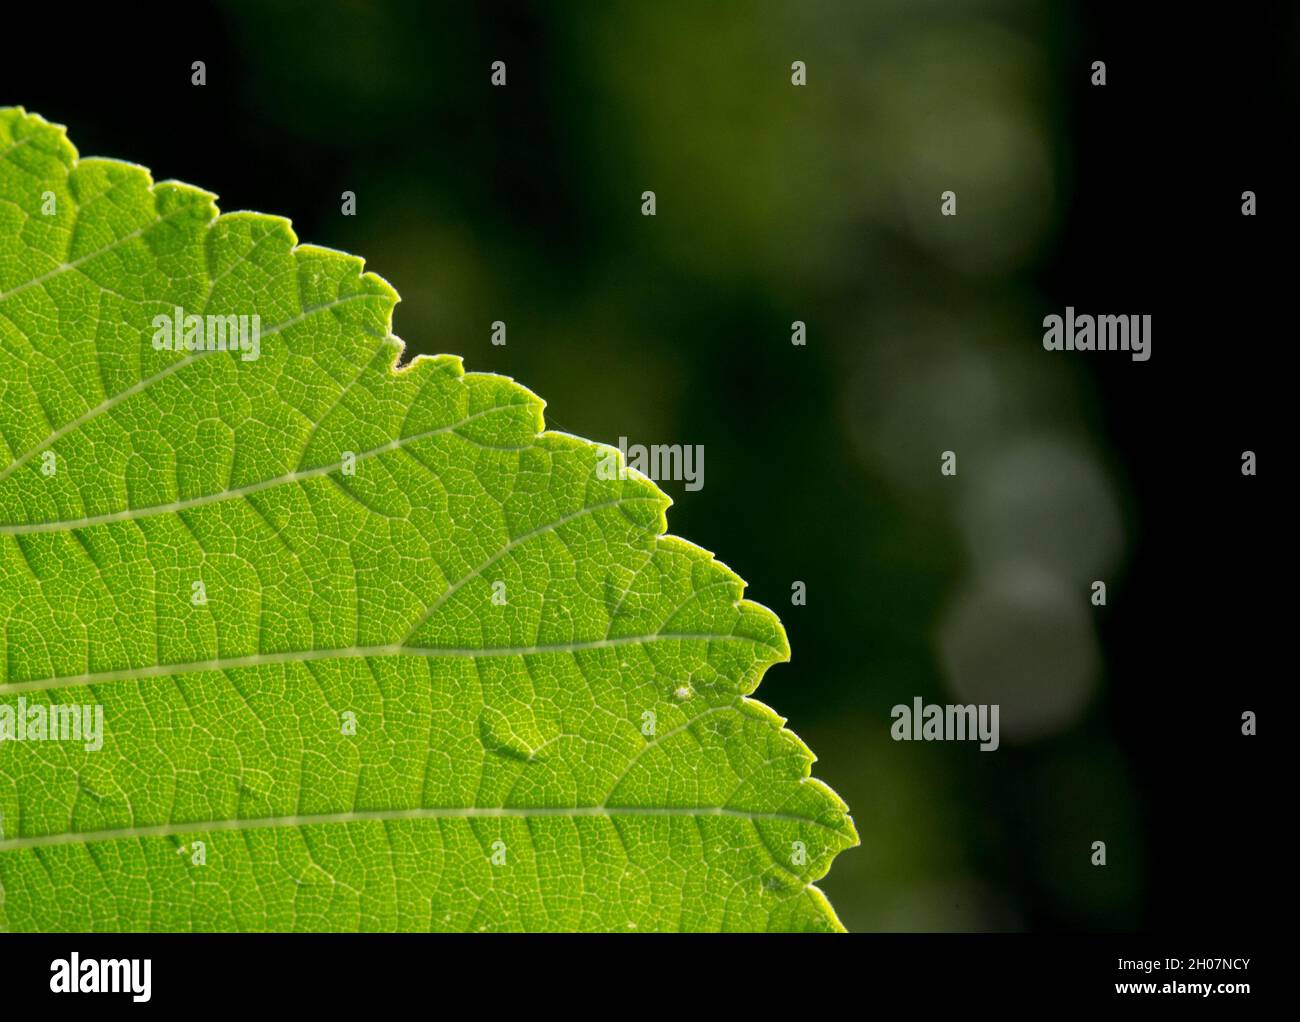 Close up of elm leaf (Ulmus) with fresh green color and texture Stock Photo